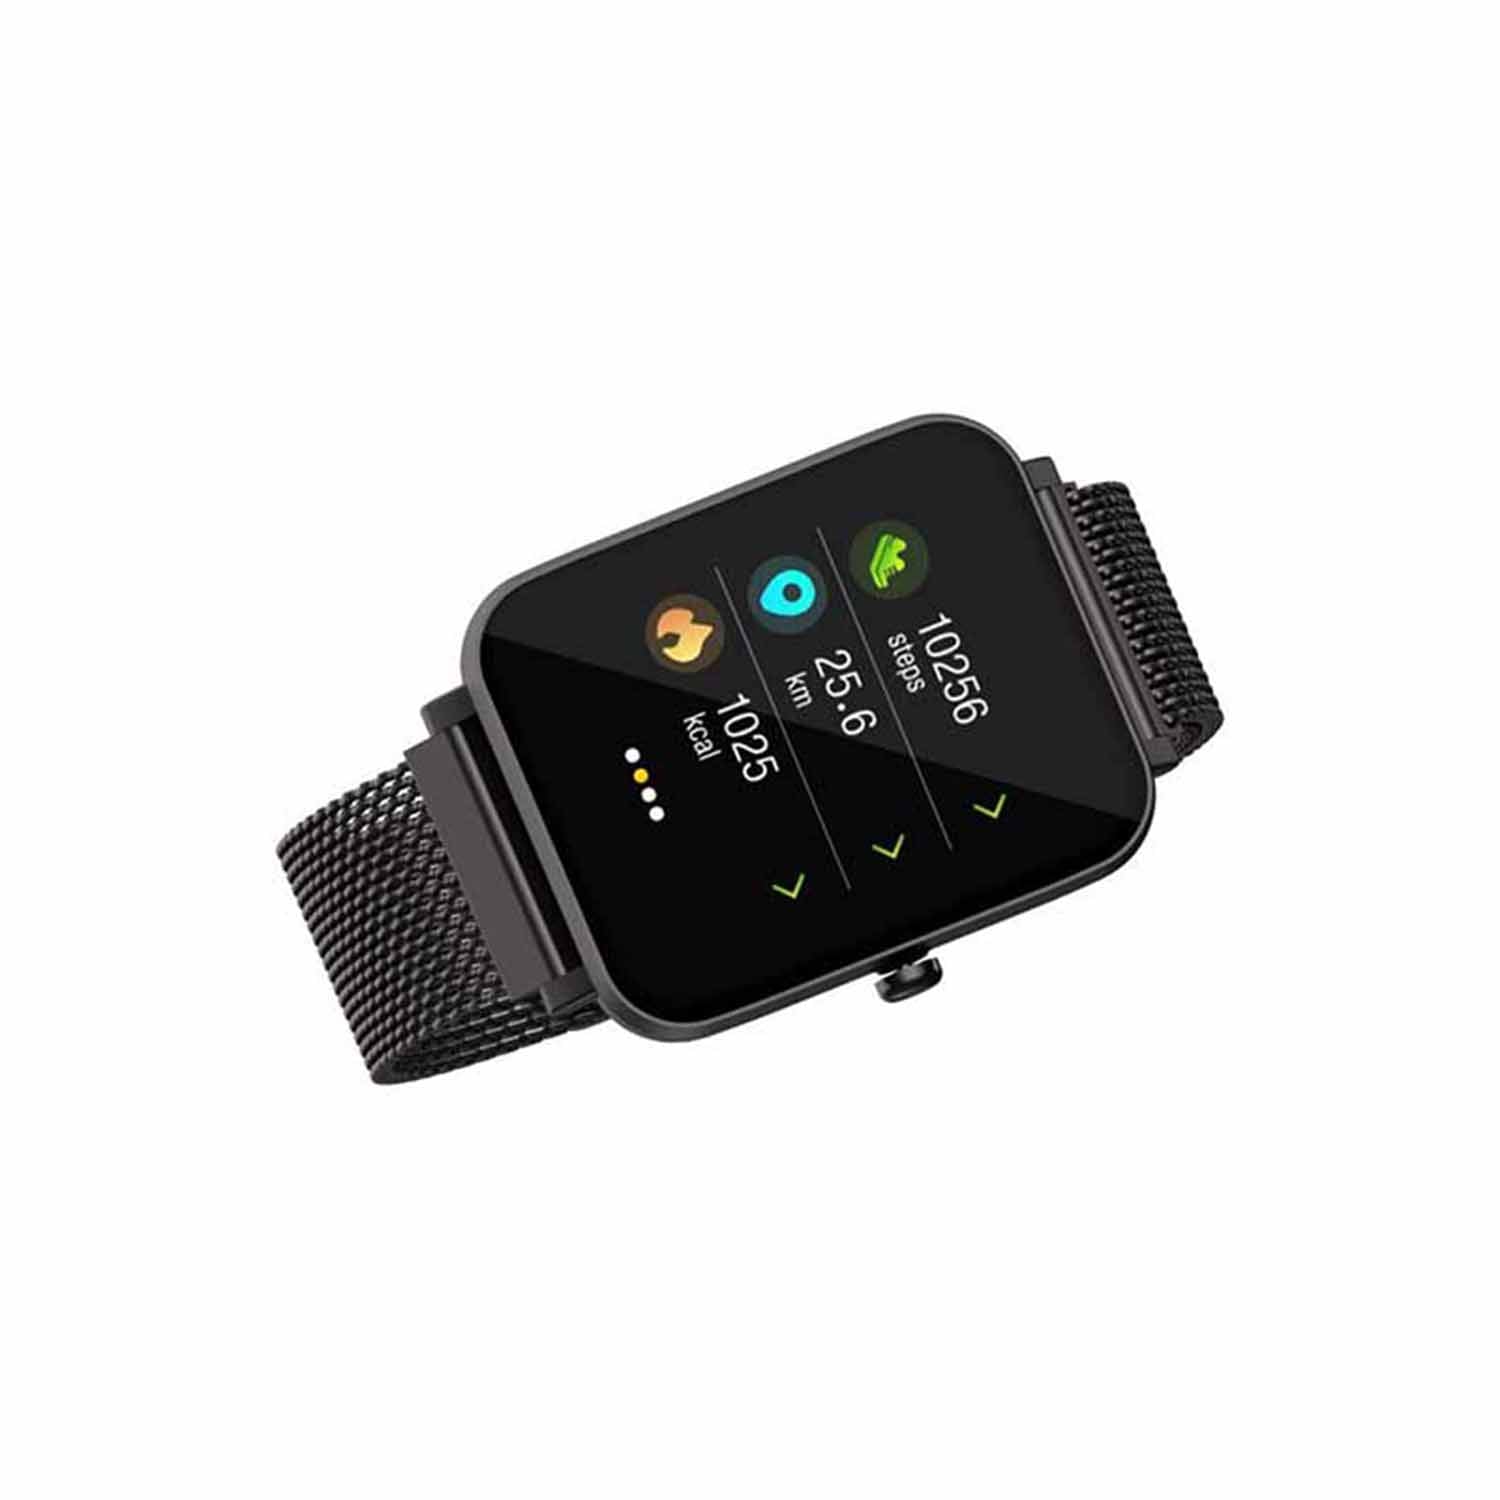 HAVIT H1103A Touch Screen Smart Watch with 3 ATM Waterproof for Business, Sports